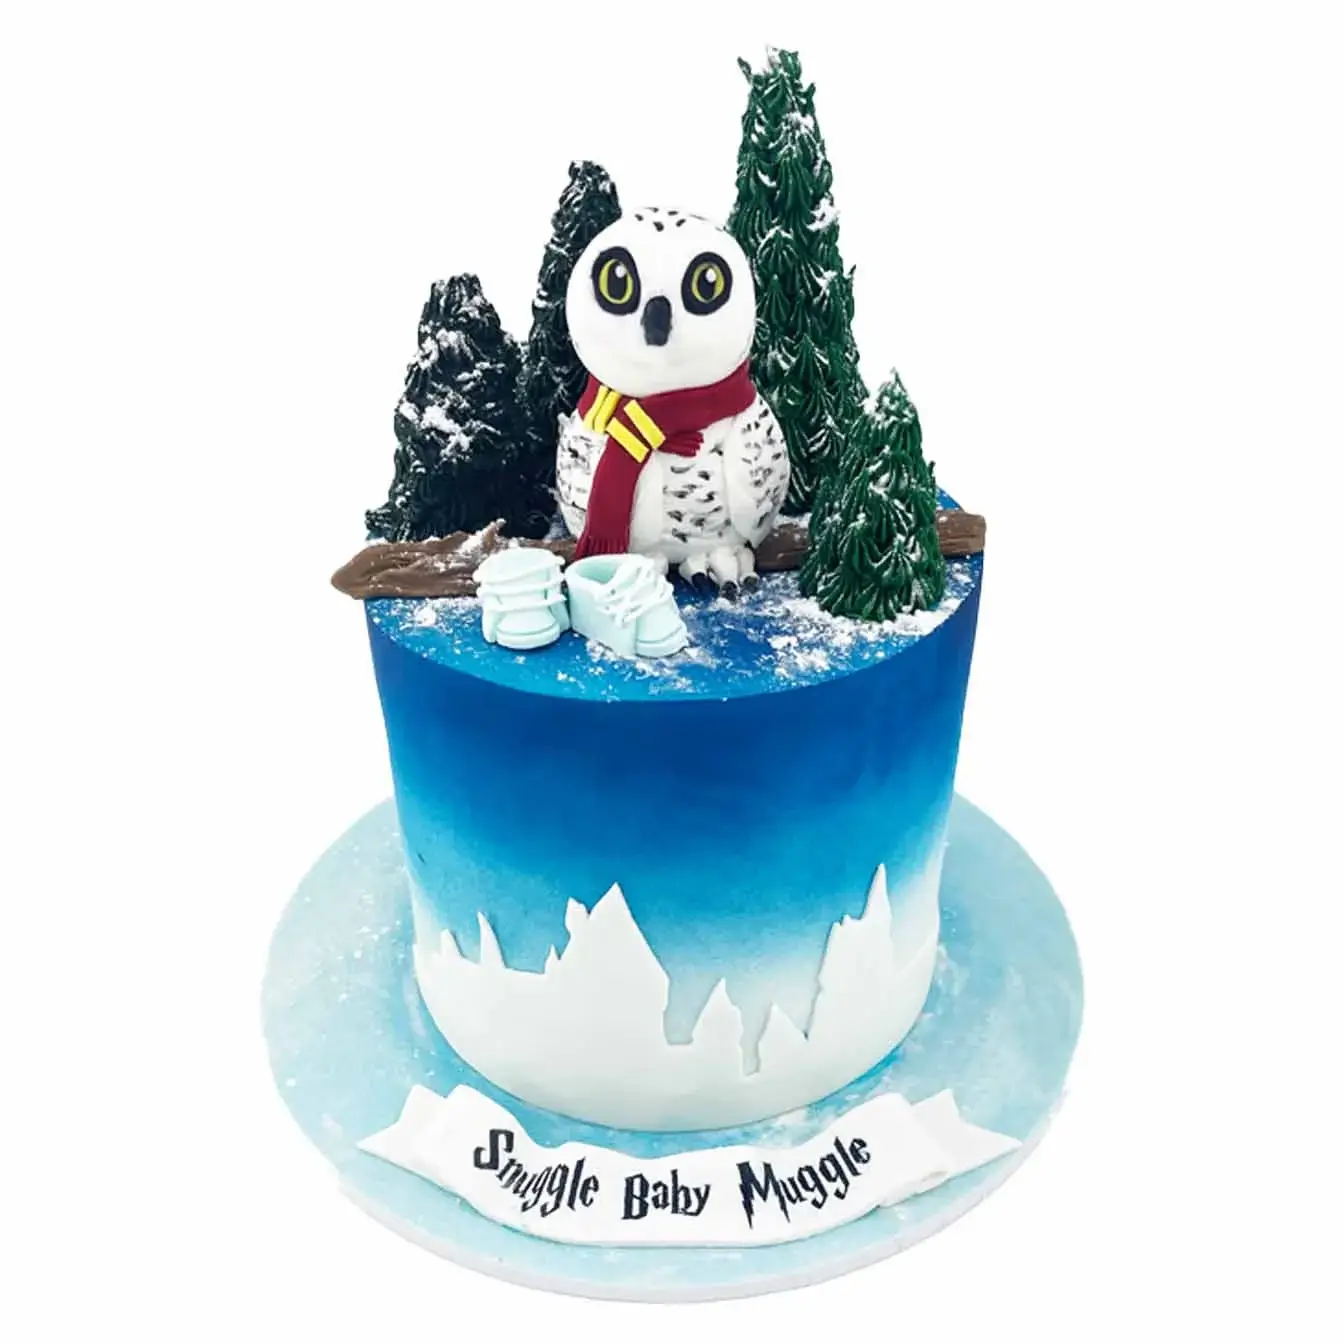 Harry Potter Magic Baby Shower Cake - A cake featuring Hedwig, a cutout silhouette of Hogwarts Castle, and the phrase 'Snuggle Baby Muggle,' a magical centerpiece perfect for Harry Potter-themed baby showers.